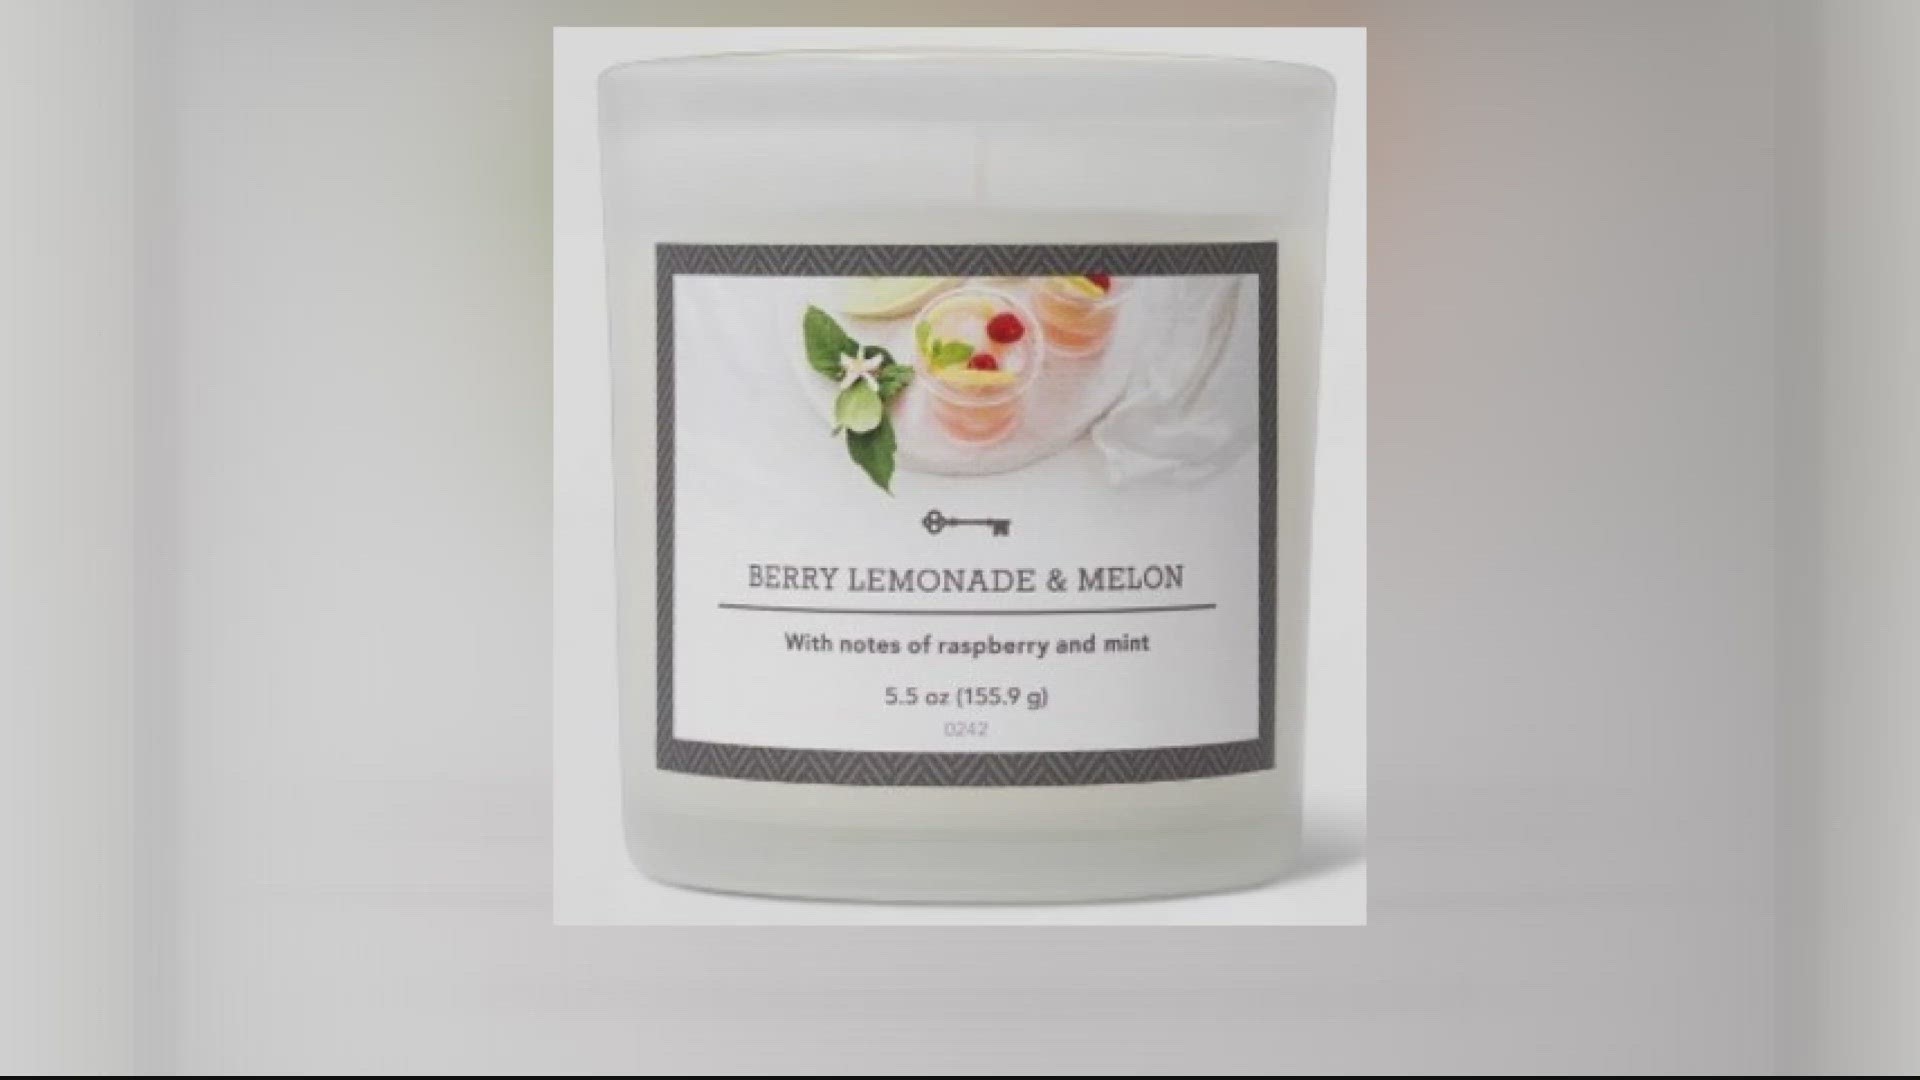 Millions of candles, which are sold exclusively at Target, have been recalled over severe burn and laceration hazards.